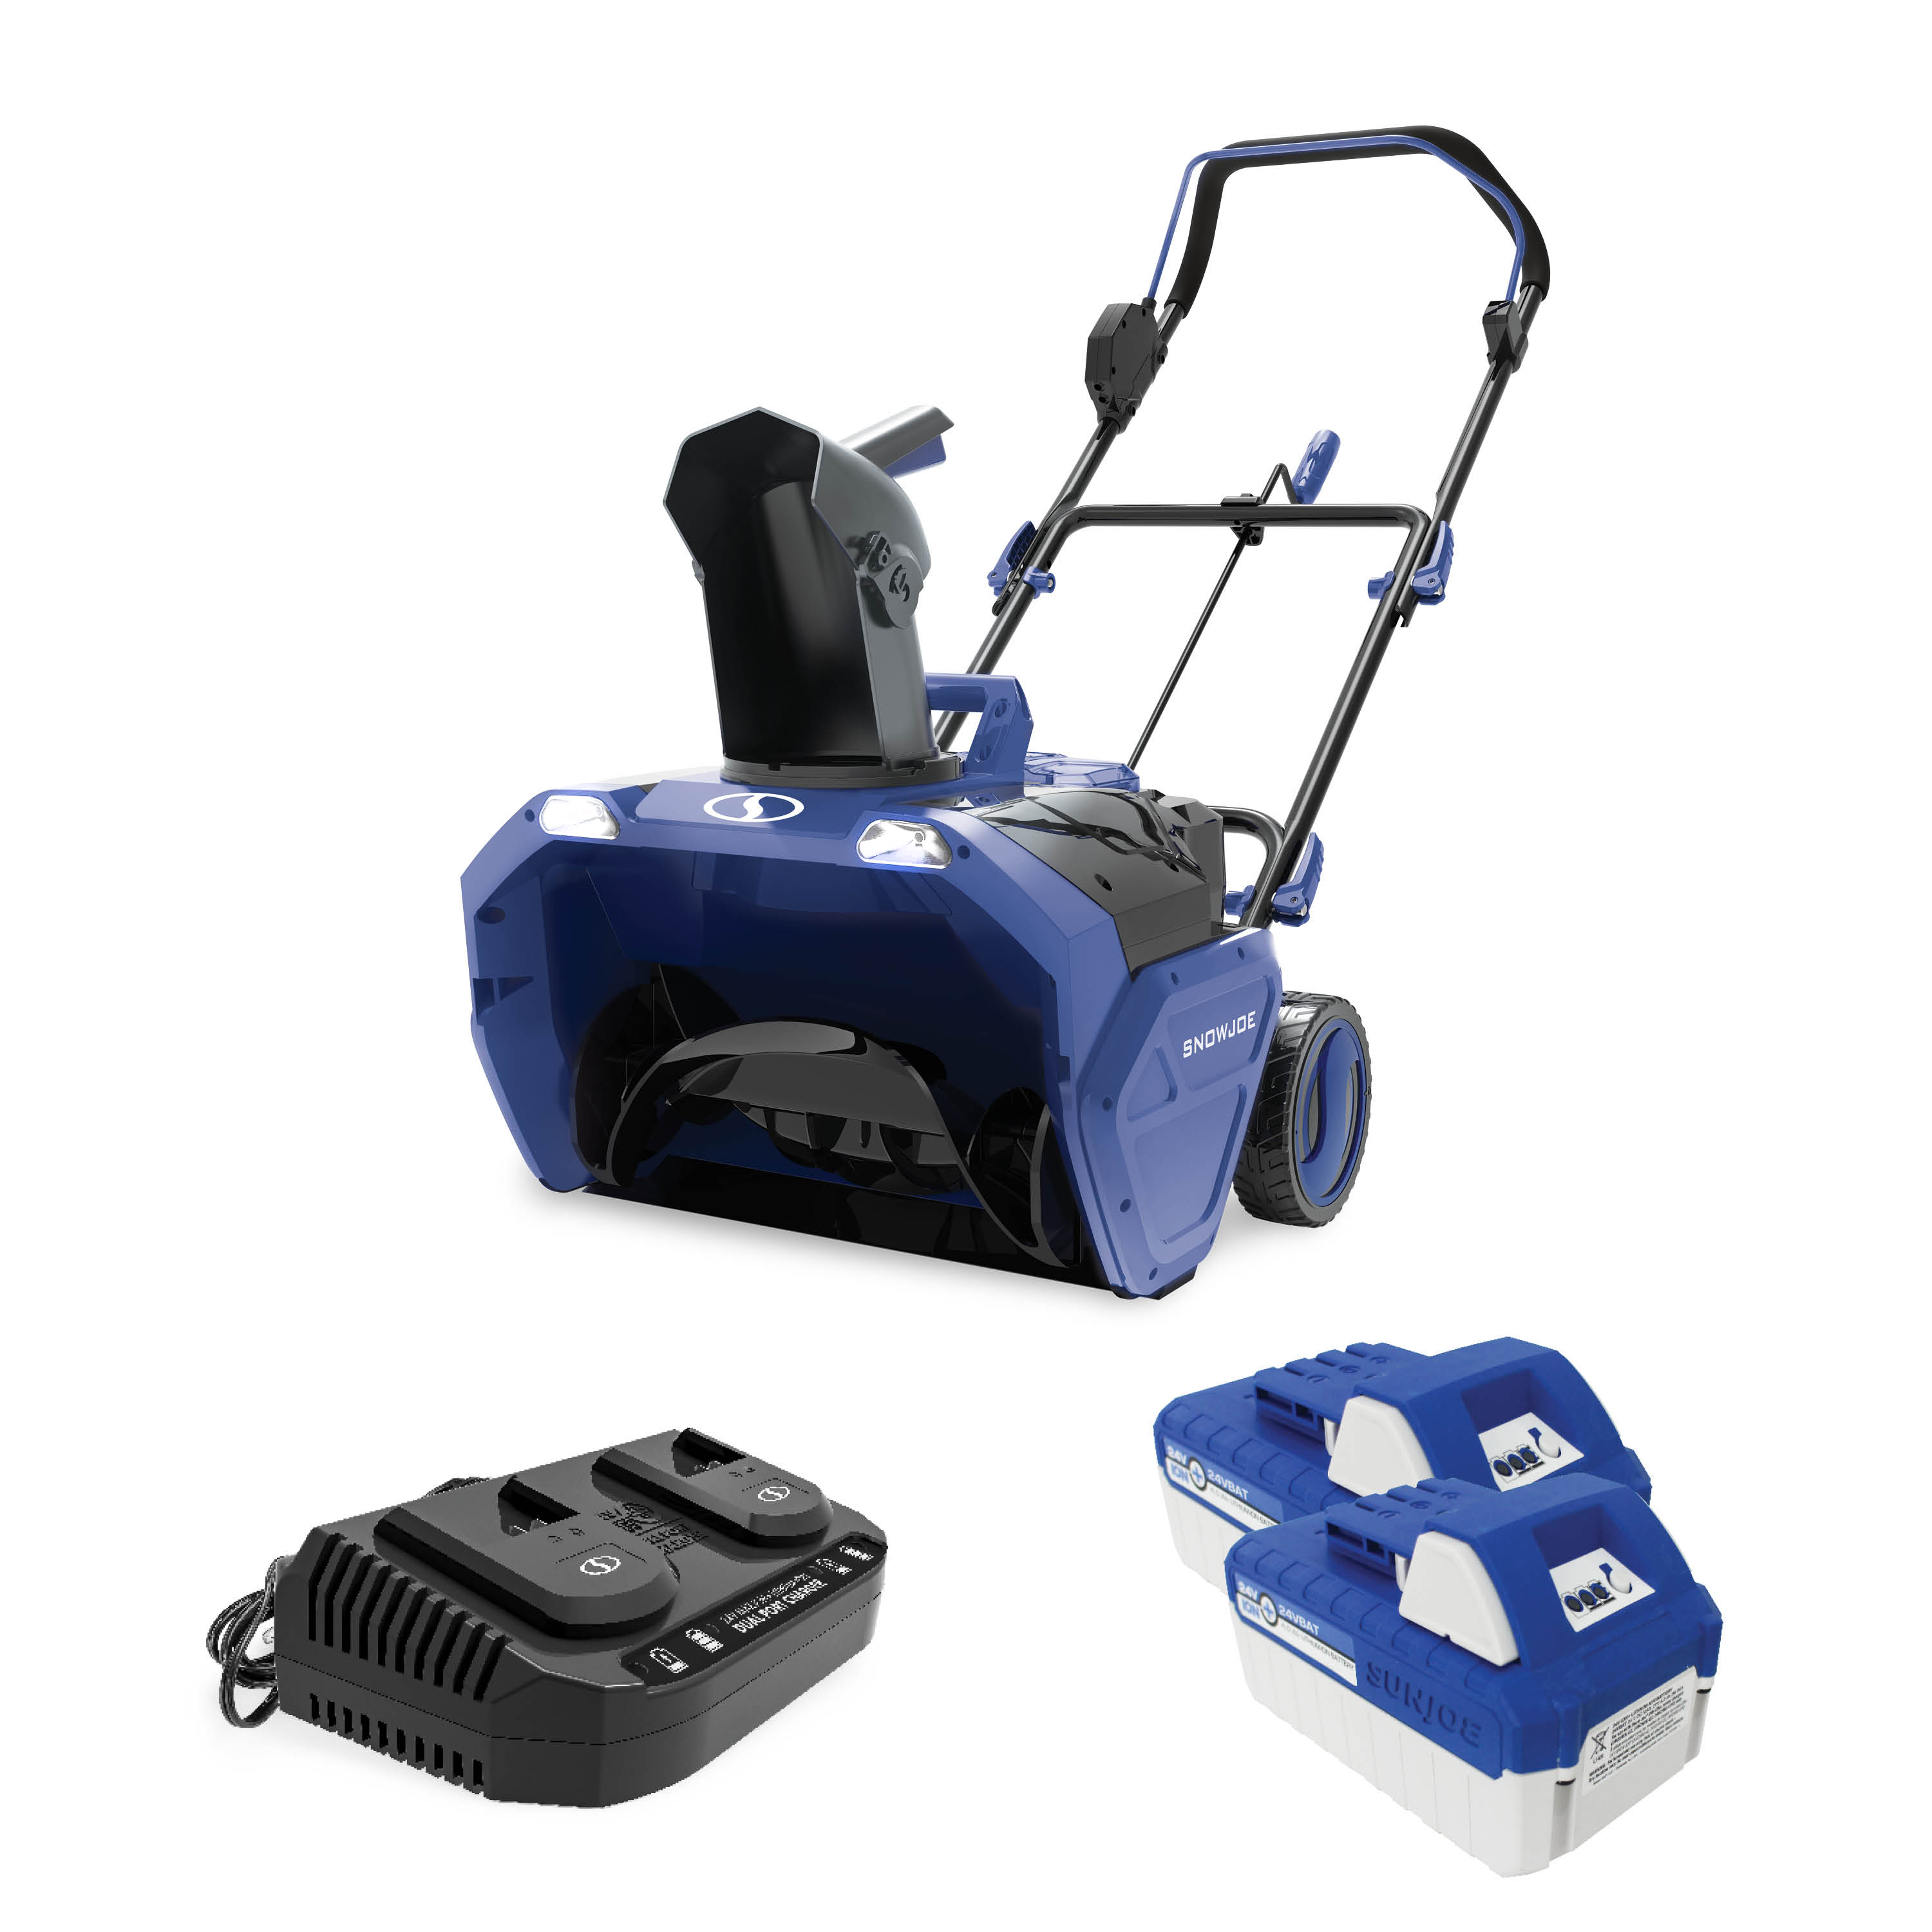 Snow Joe 48V 20" Cordless Brushless Single-Stage Snow Blower, 2 x 4.0-Ah Batteries & Charger - image 1 of 13